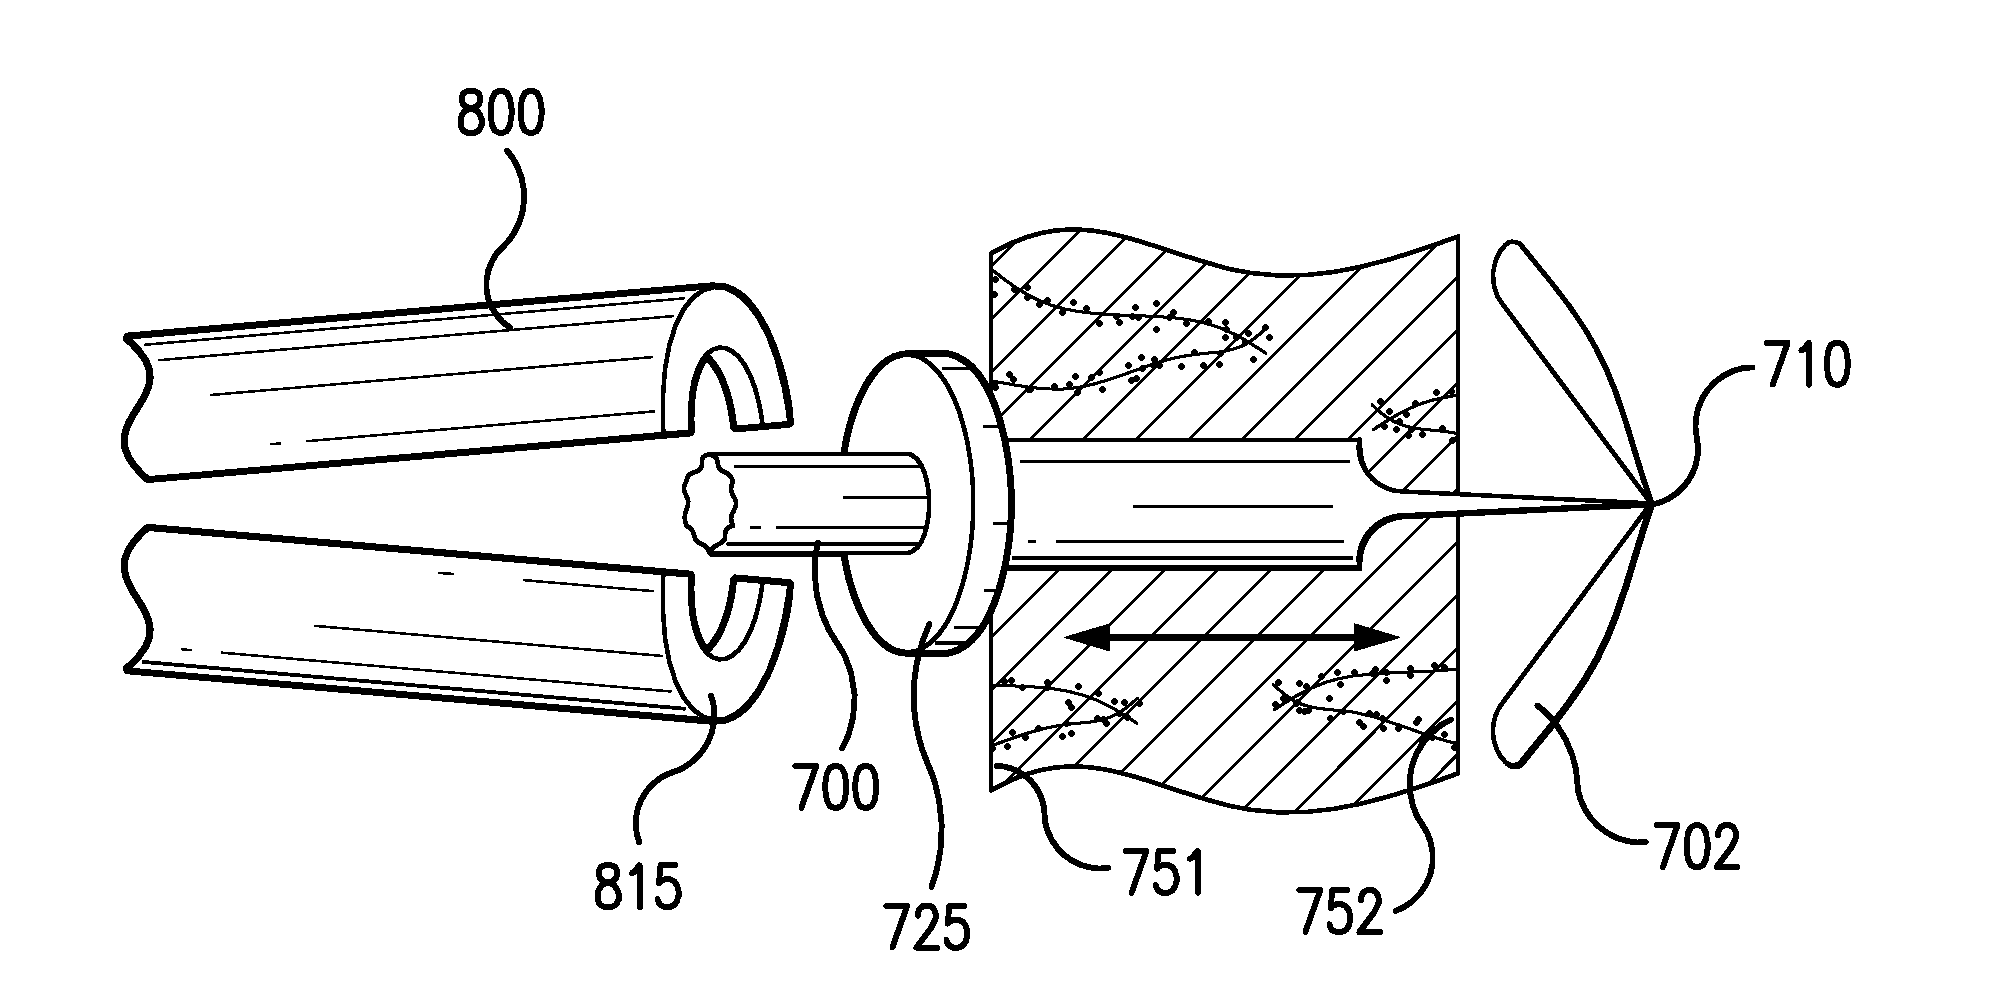 Tissue repair implant and delivery device and method